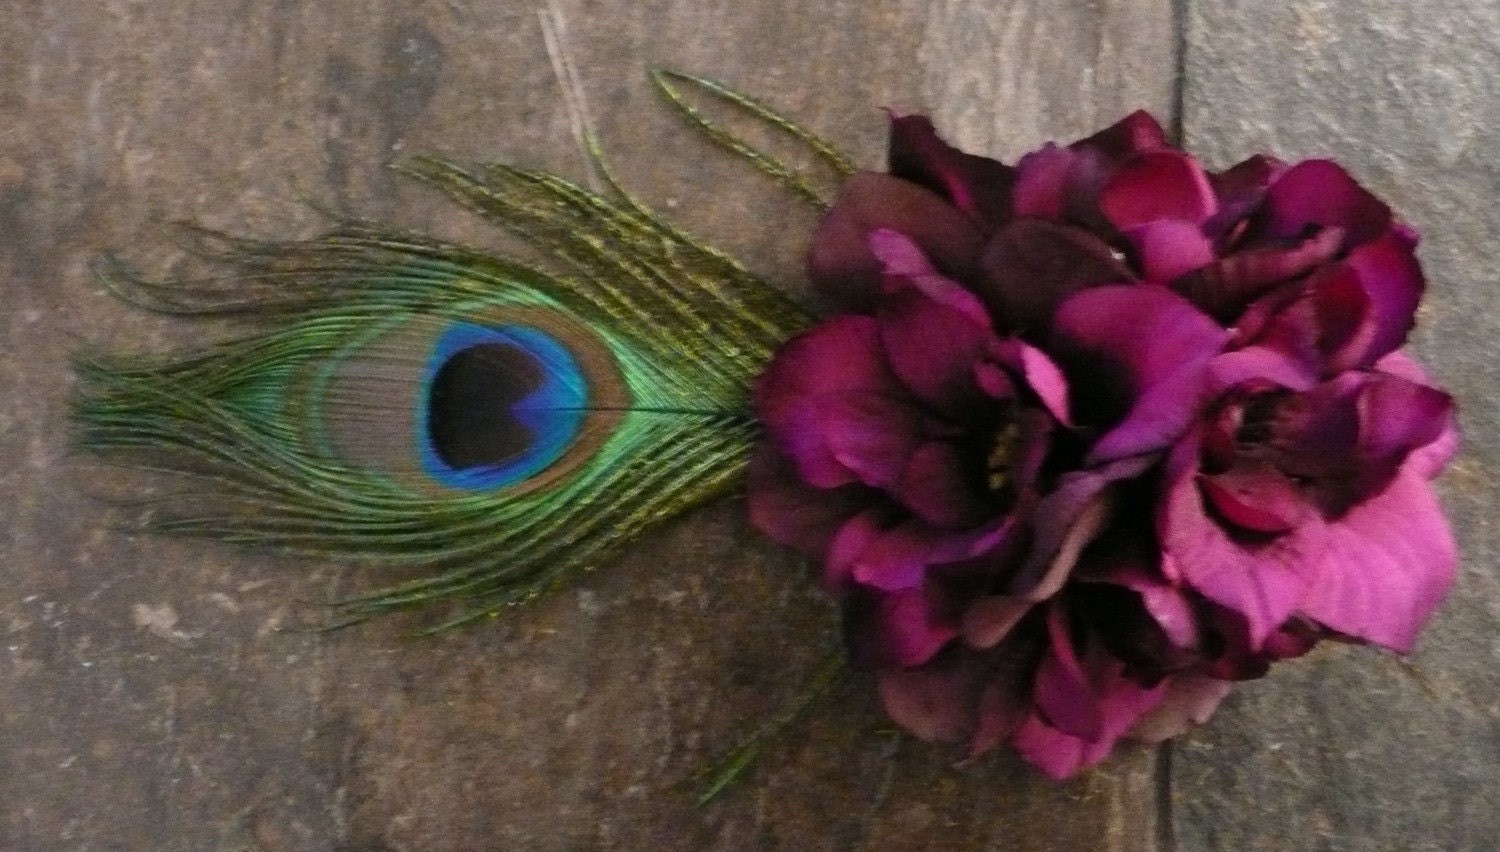 Belinda: Bundle of Purple Delphinium with a Peacock Feather. Free Worldwide Shipping